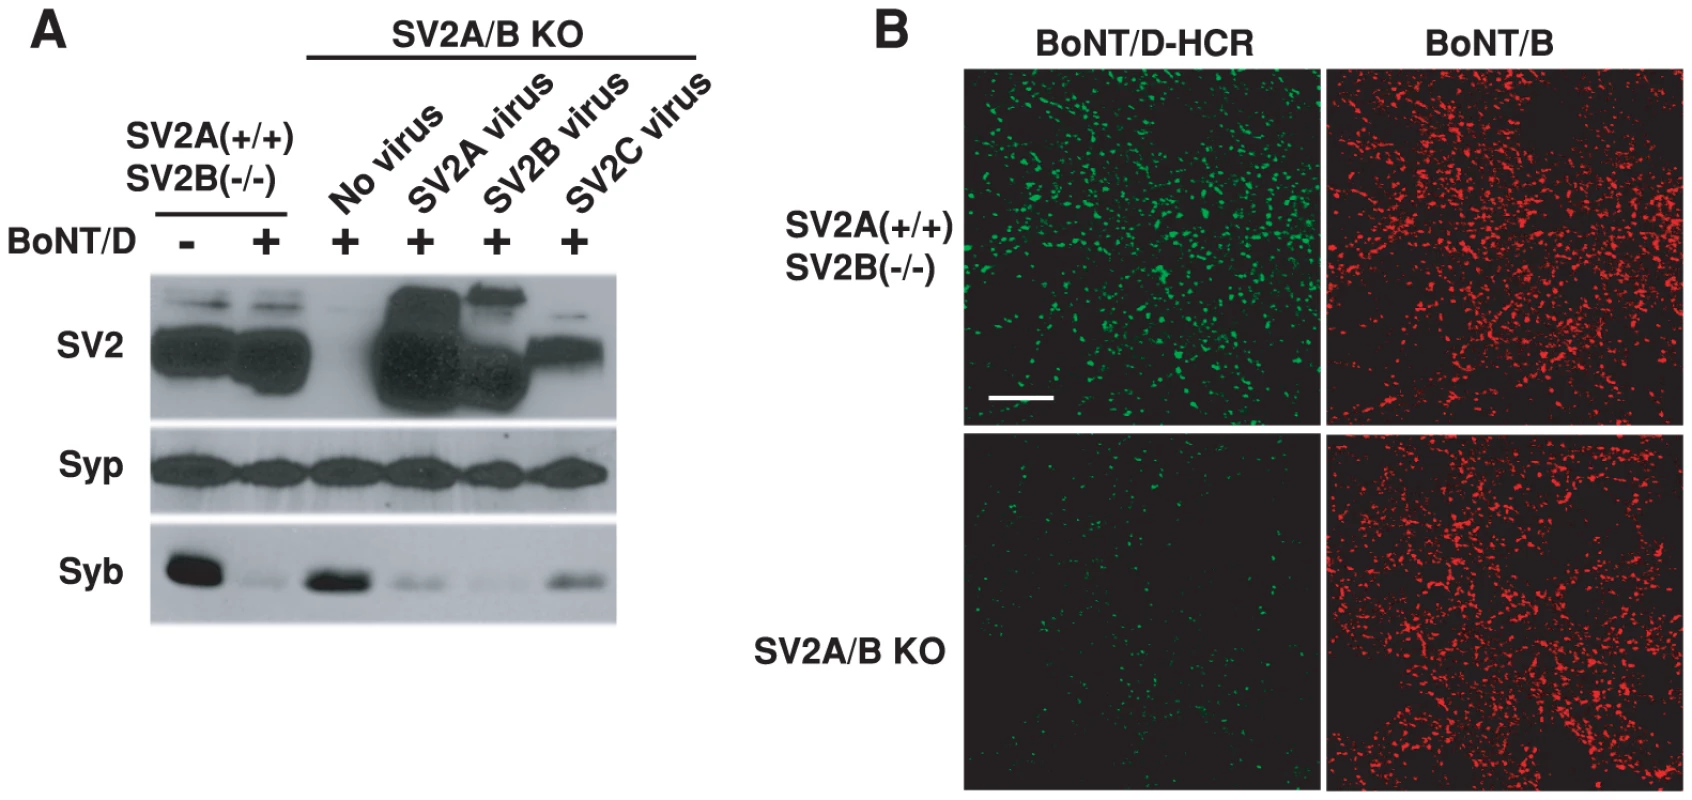 SV2 is essential for the binding and entry of BoNT/D into neurons.